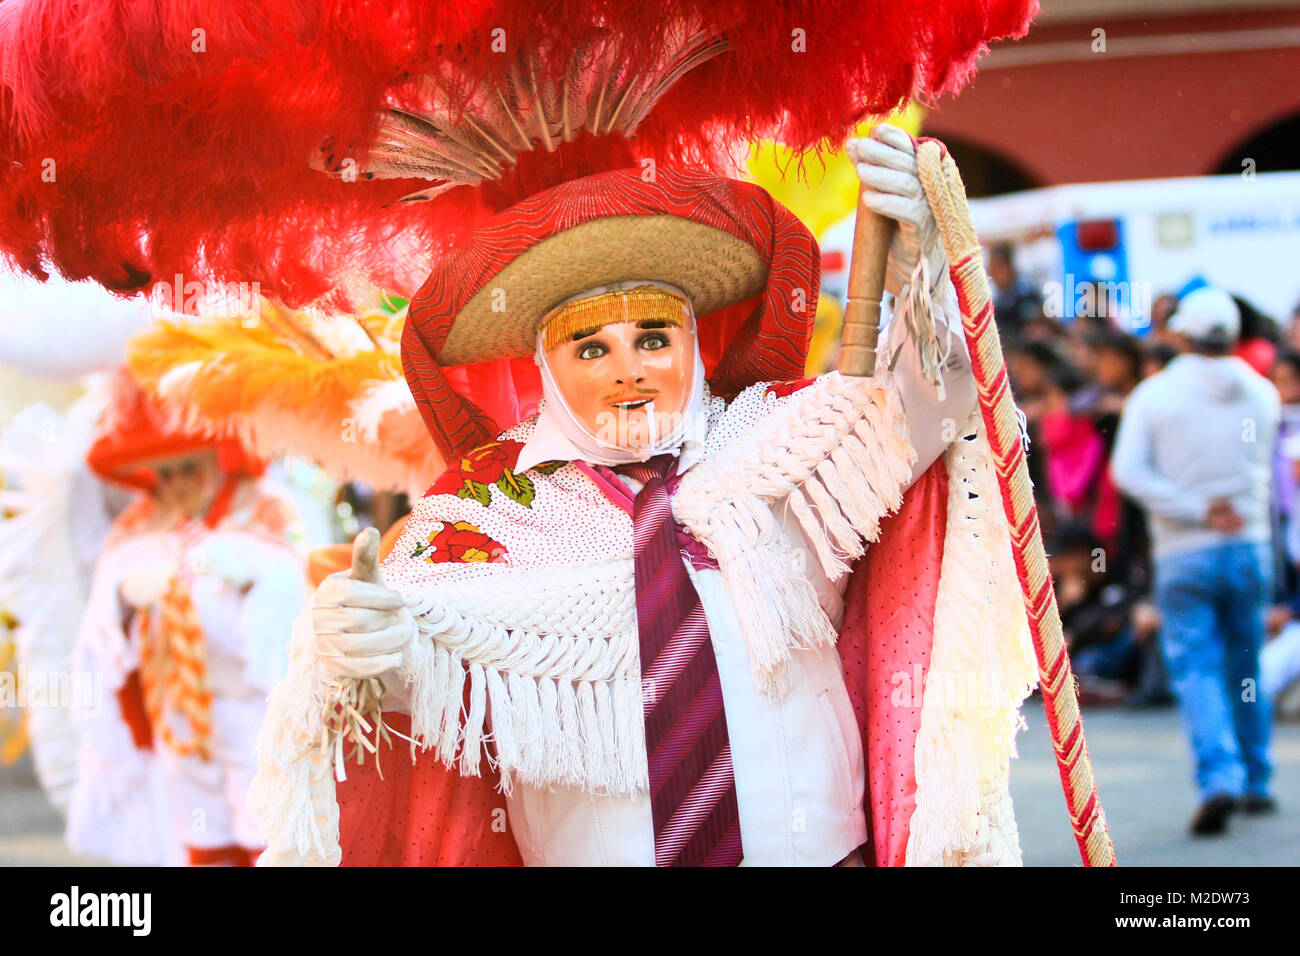 Horizontal photo of a Carnival scene, a dancer wearing a traditional mexican folk costume and mask rich in color Stock Photo